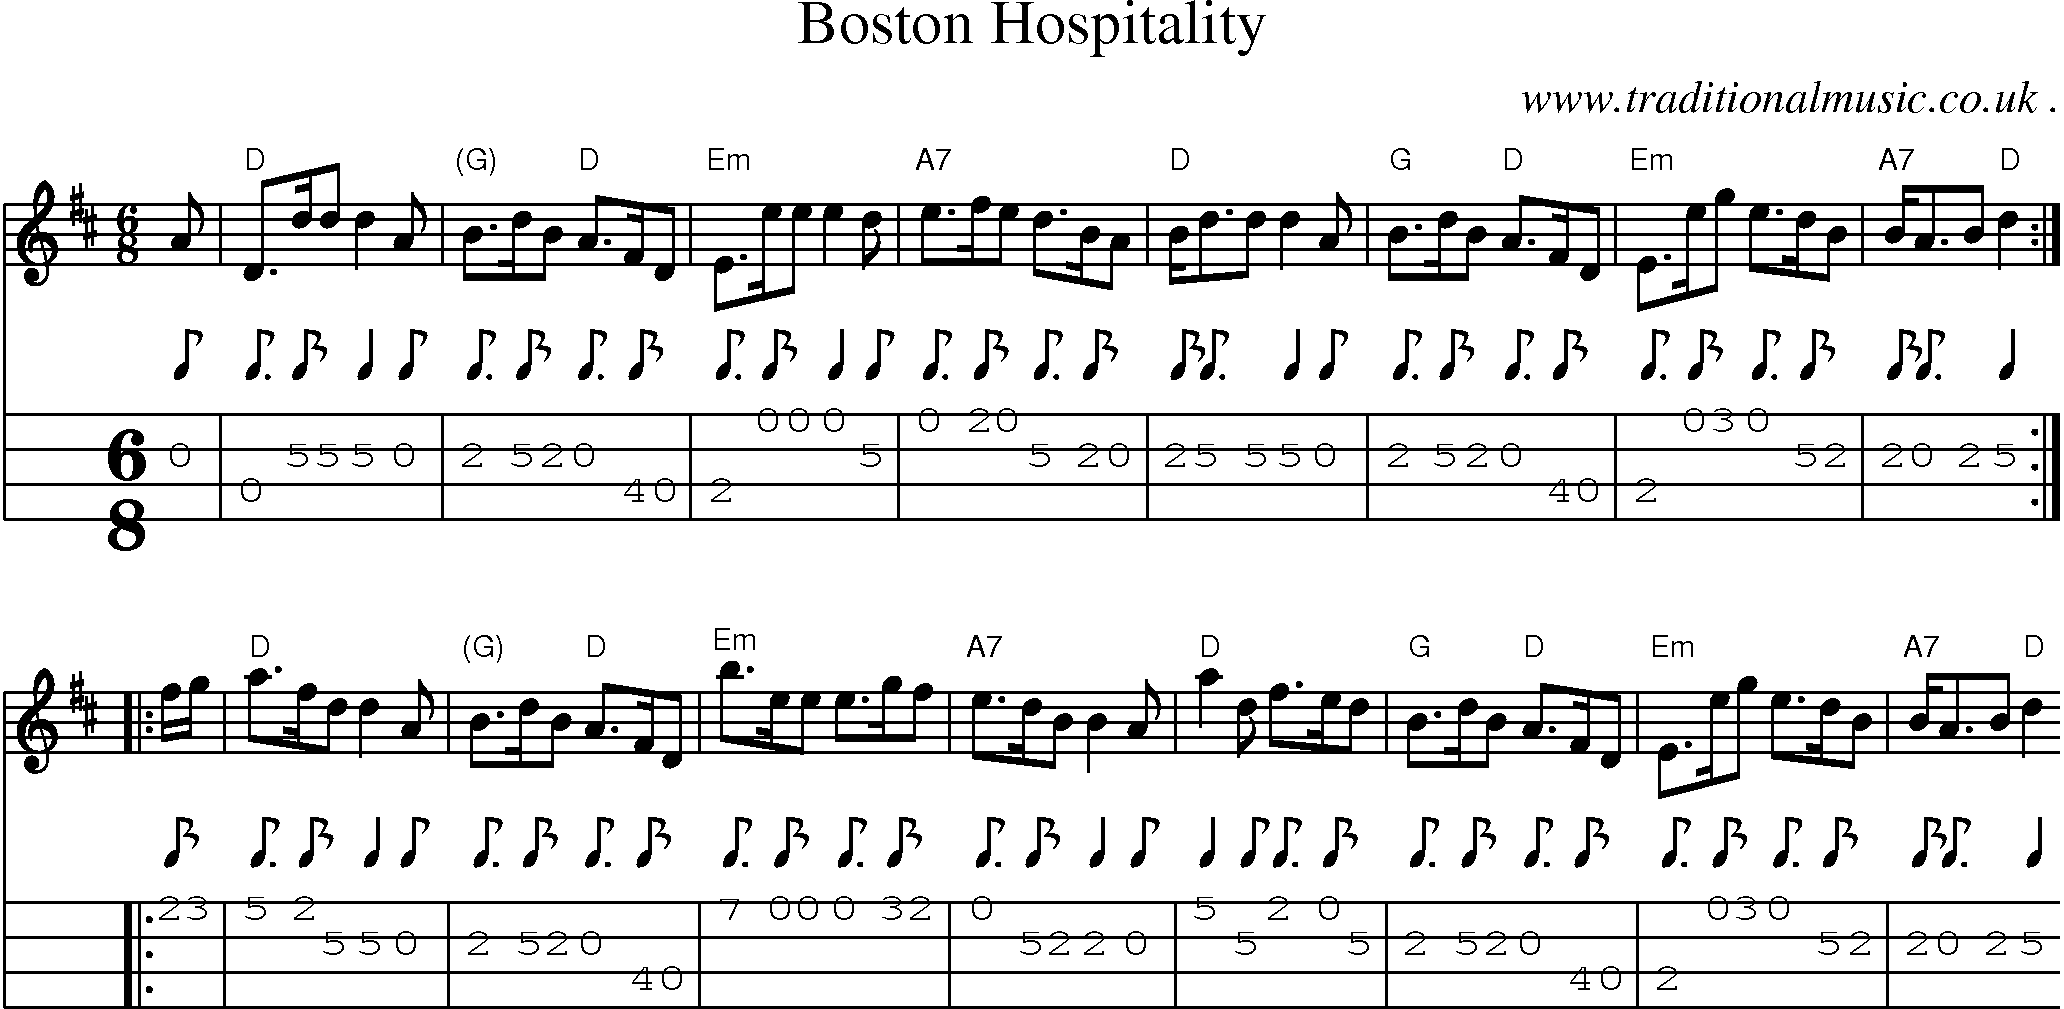 Sheet-music  score, Chords and Mandolin Tabs for Boston Hospitality